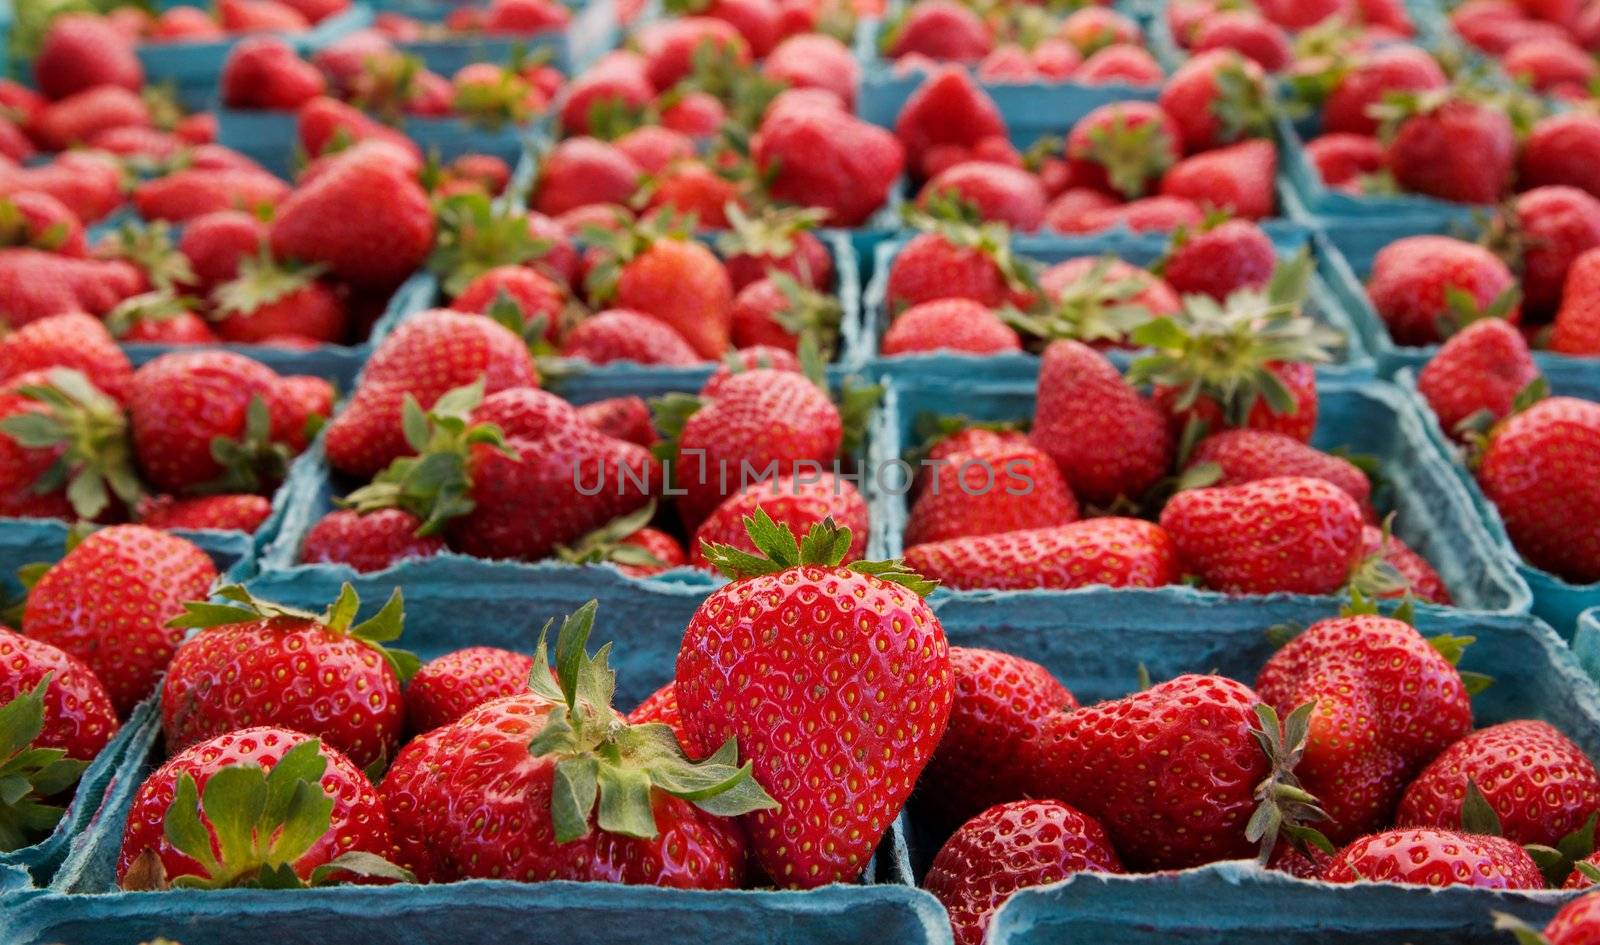 Focus on single ripe strawberry with soft focus boxes of the fruit in background